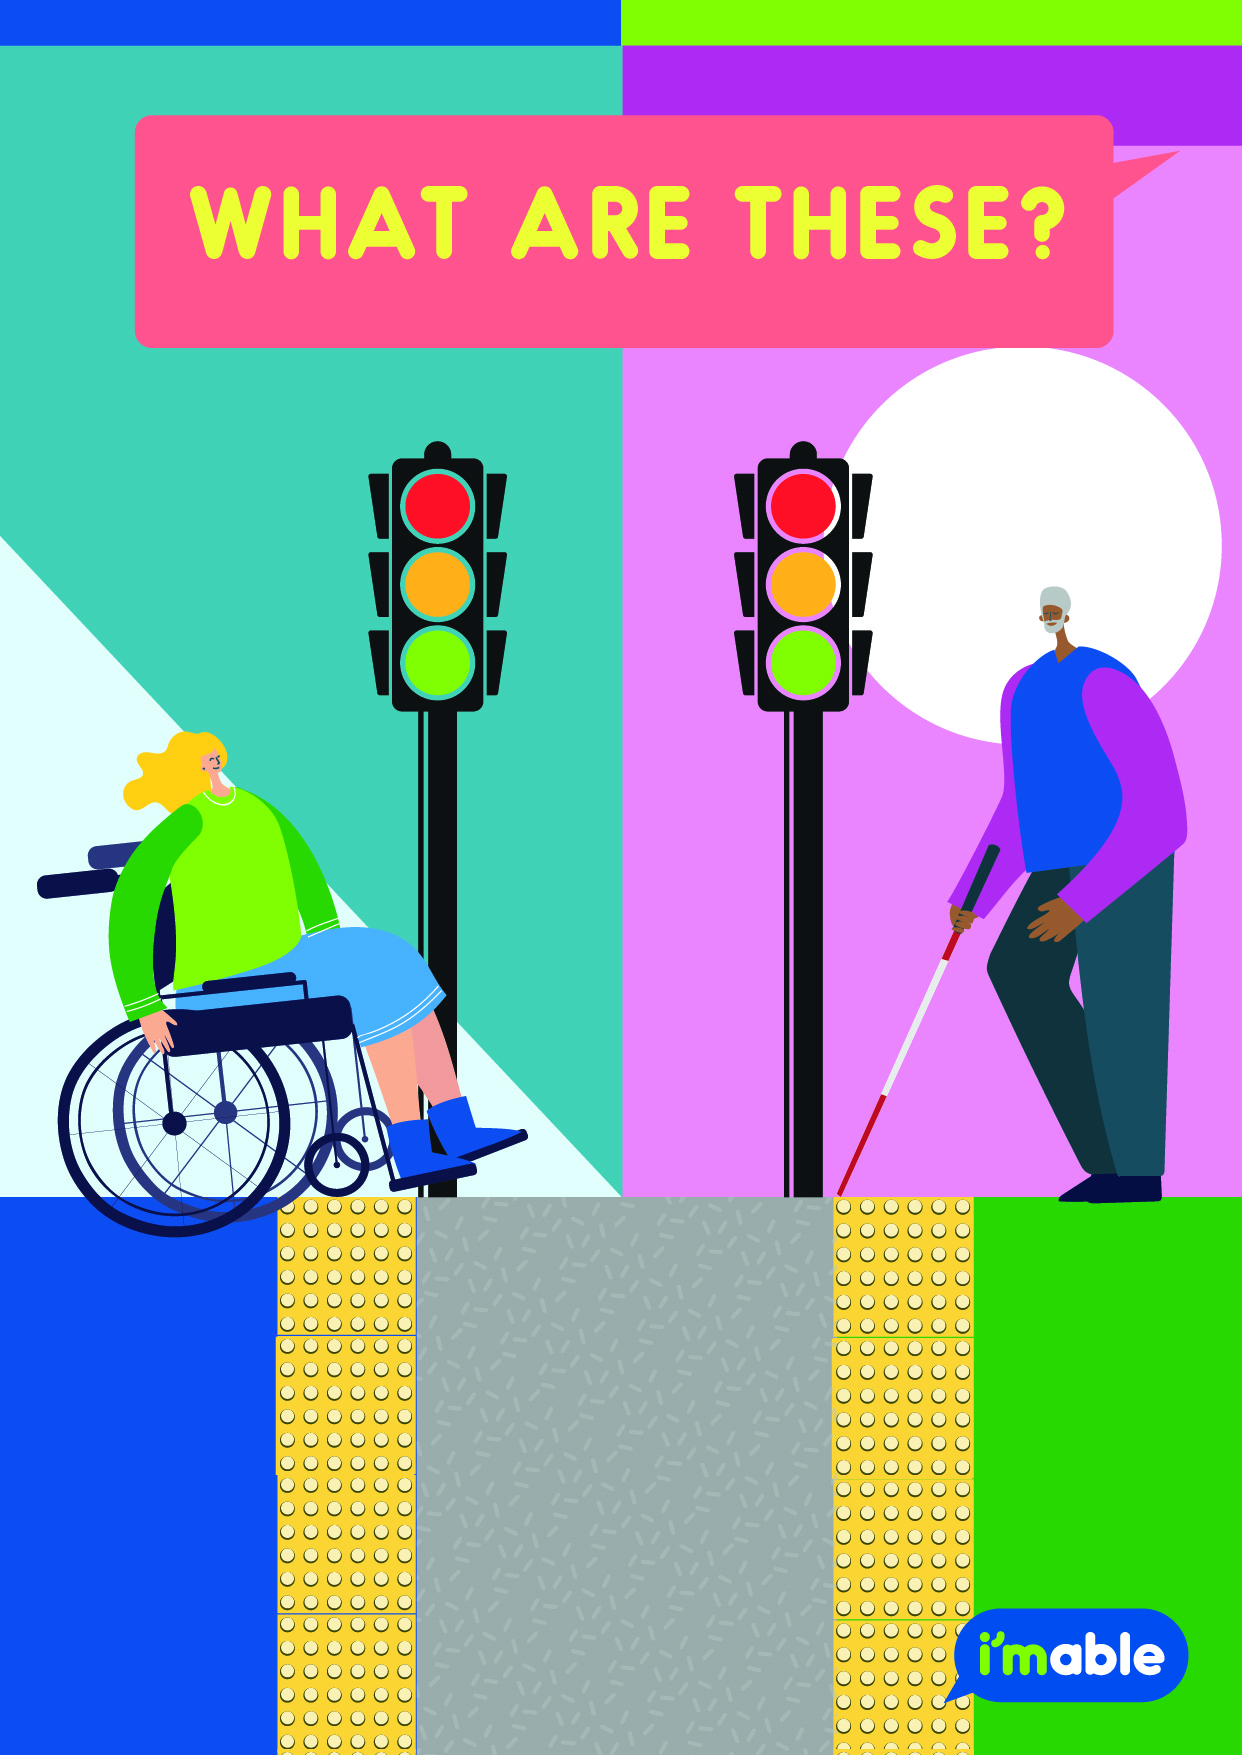 Illustration of two people, one with a walking stick the other in a wheelchair, at a traffic junction.